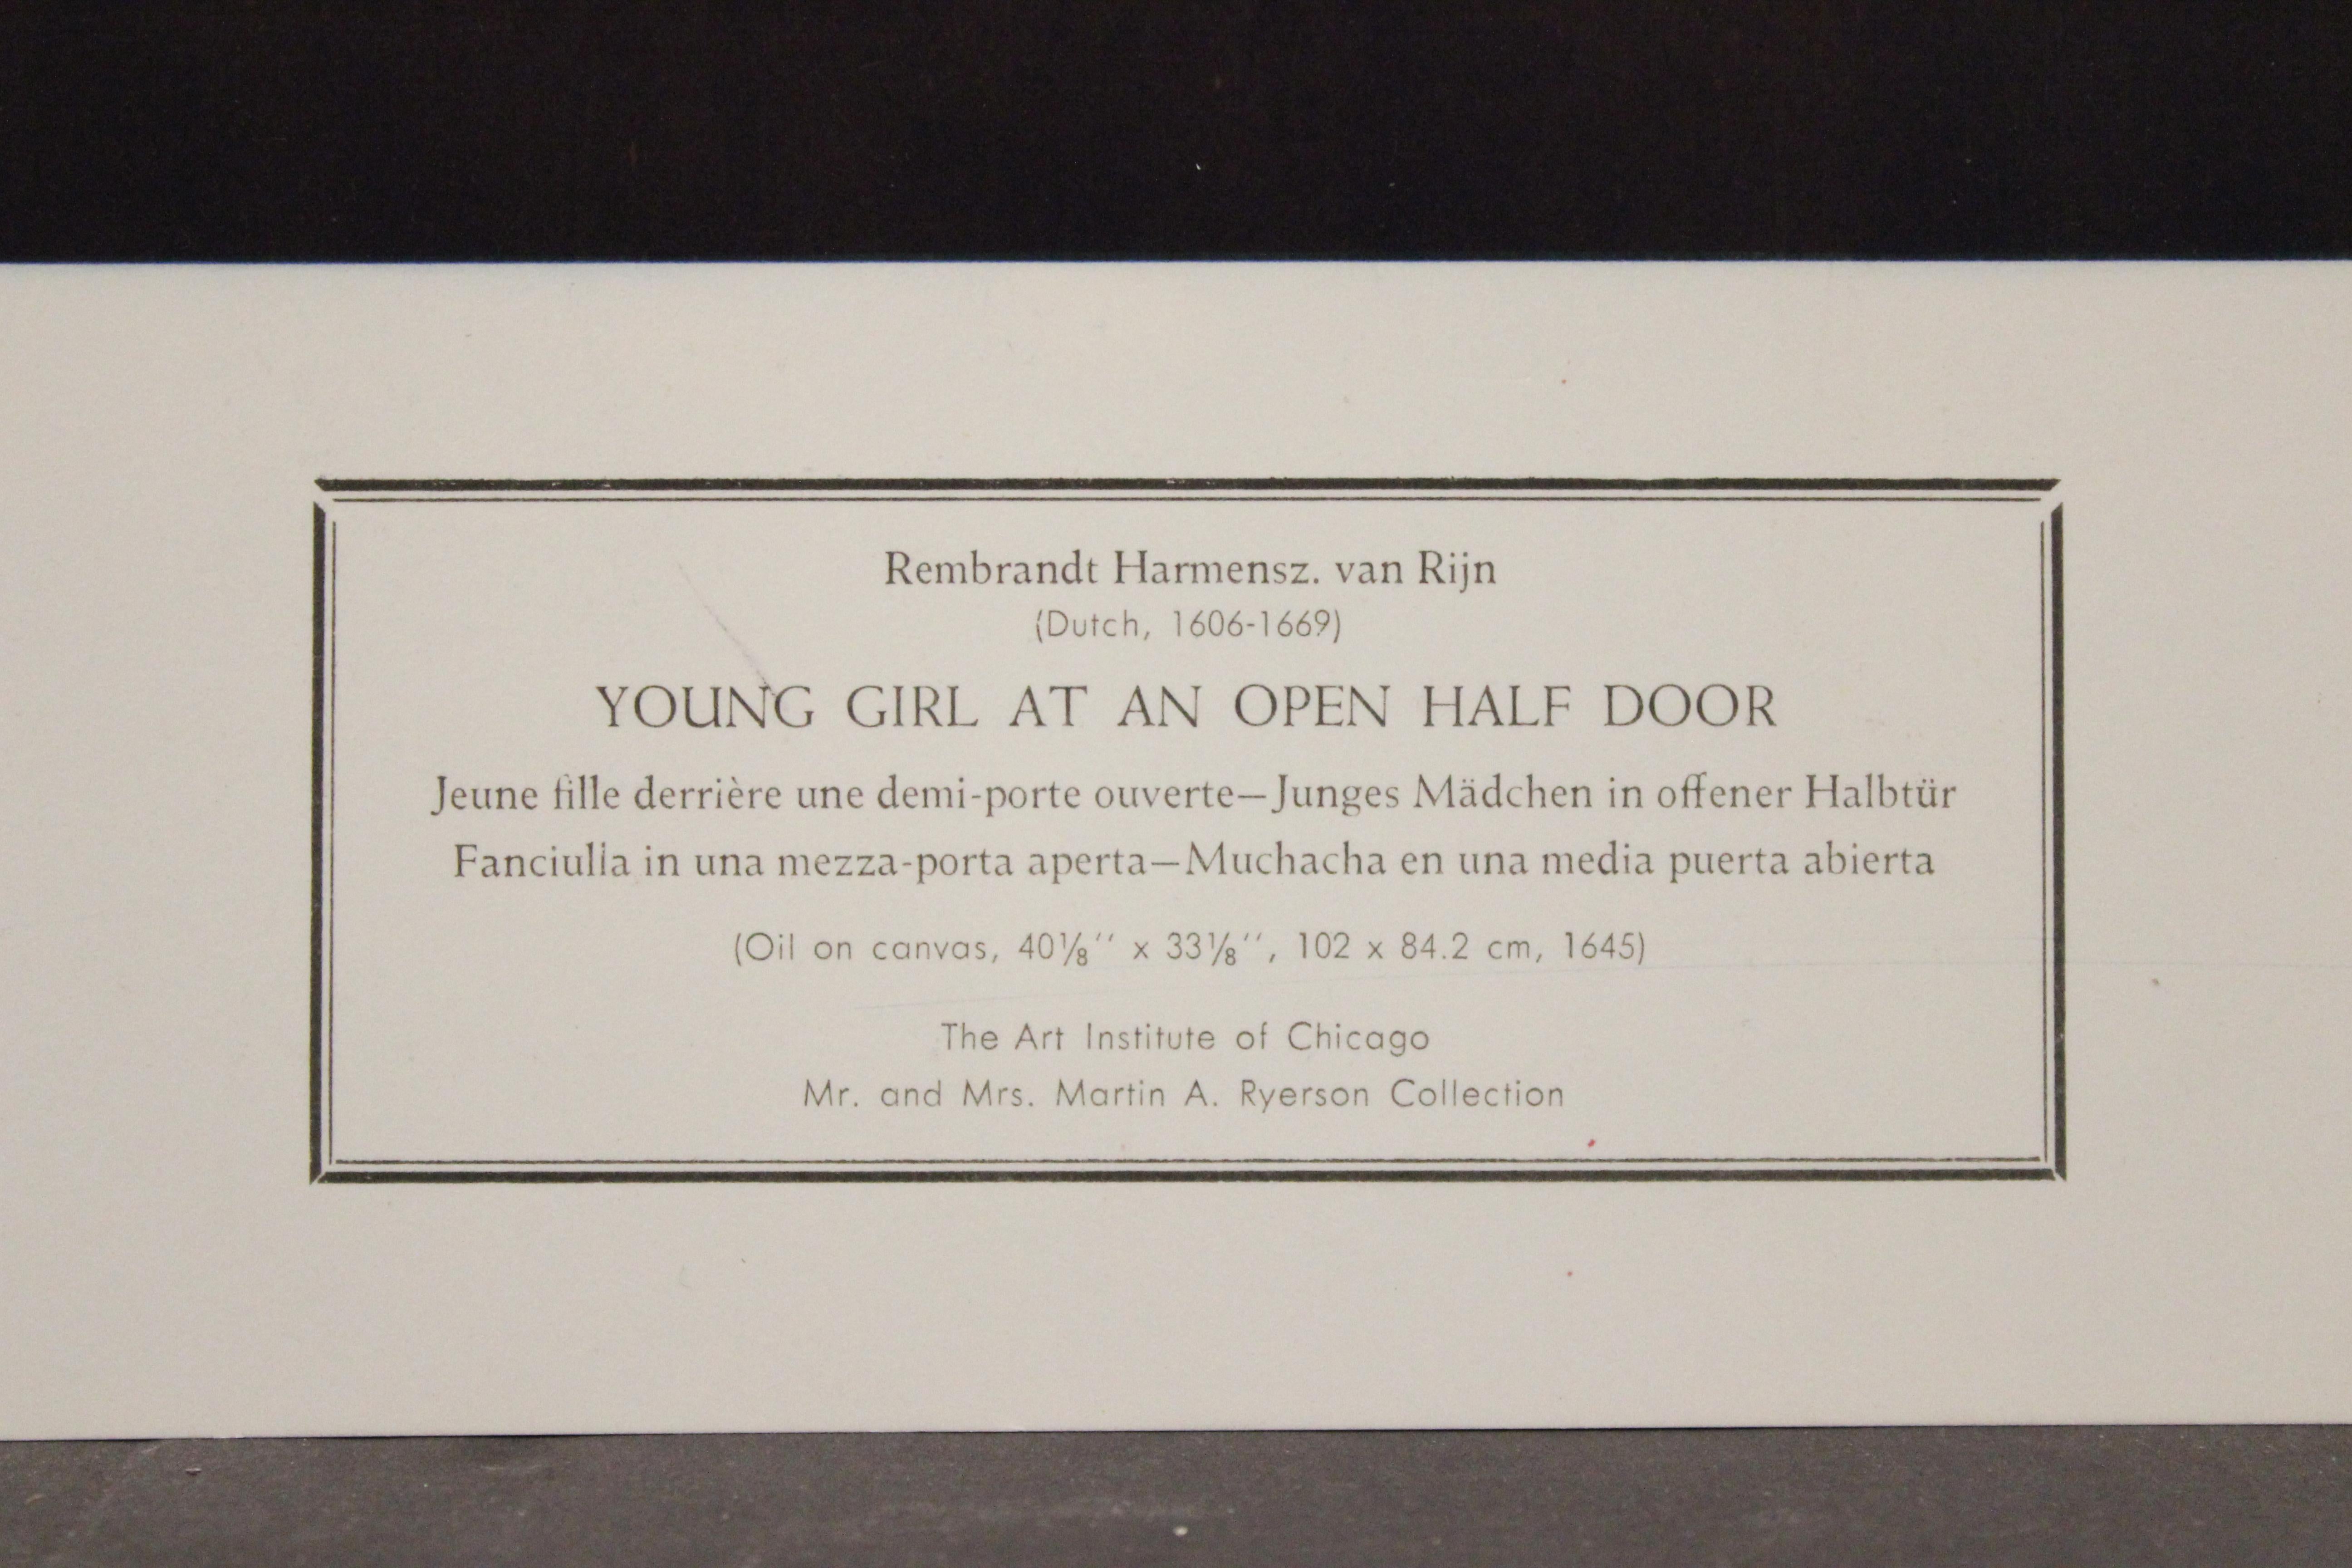 Young Girl At An Open Half Door-Poster. New York Graphic Society, Ltd. - Print by (After) Rembrandt van Rijn 